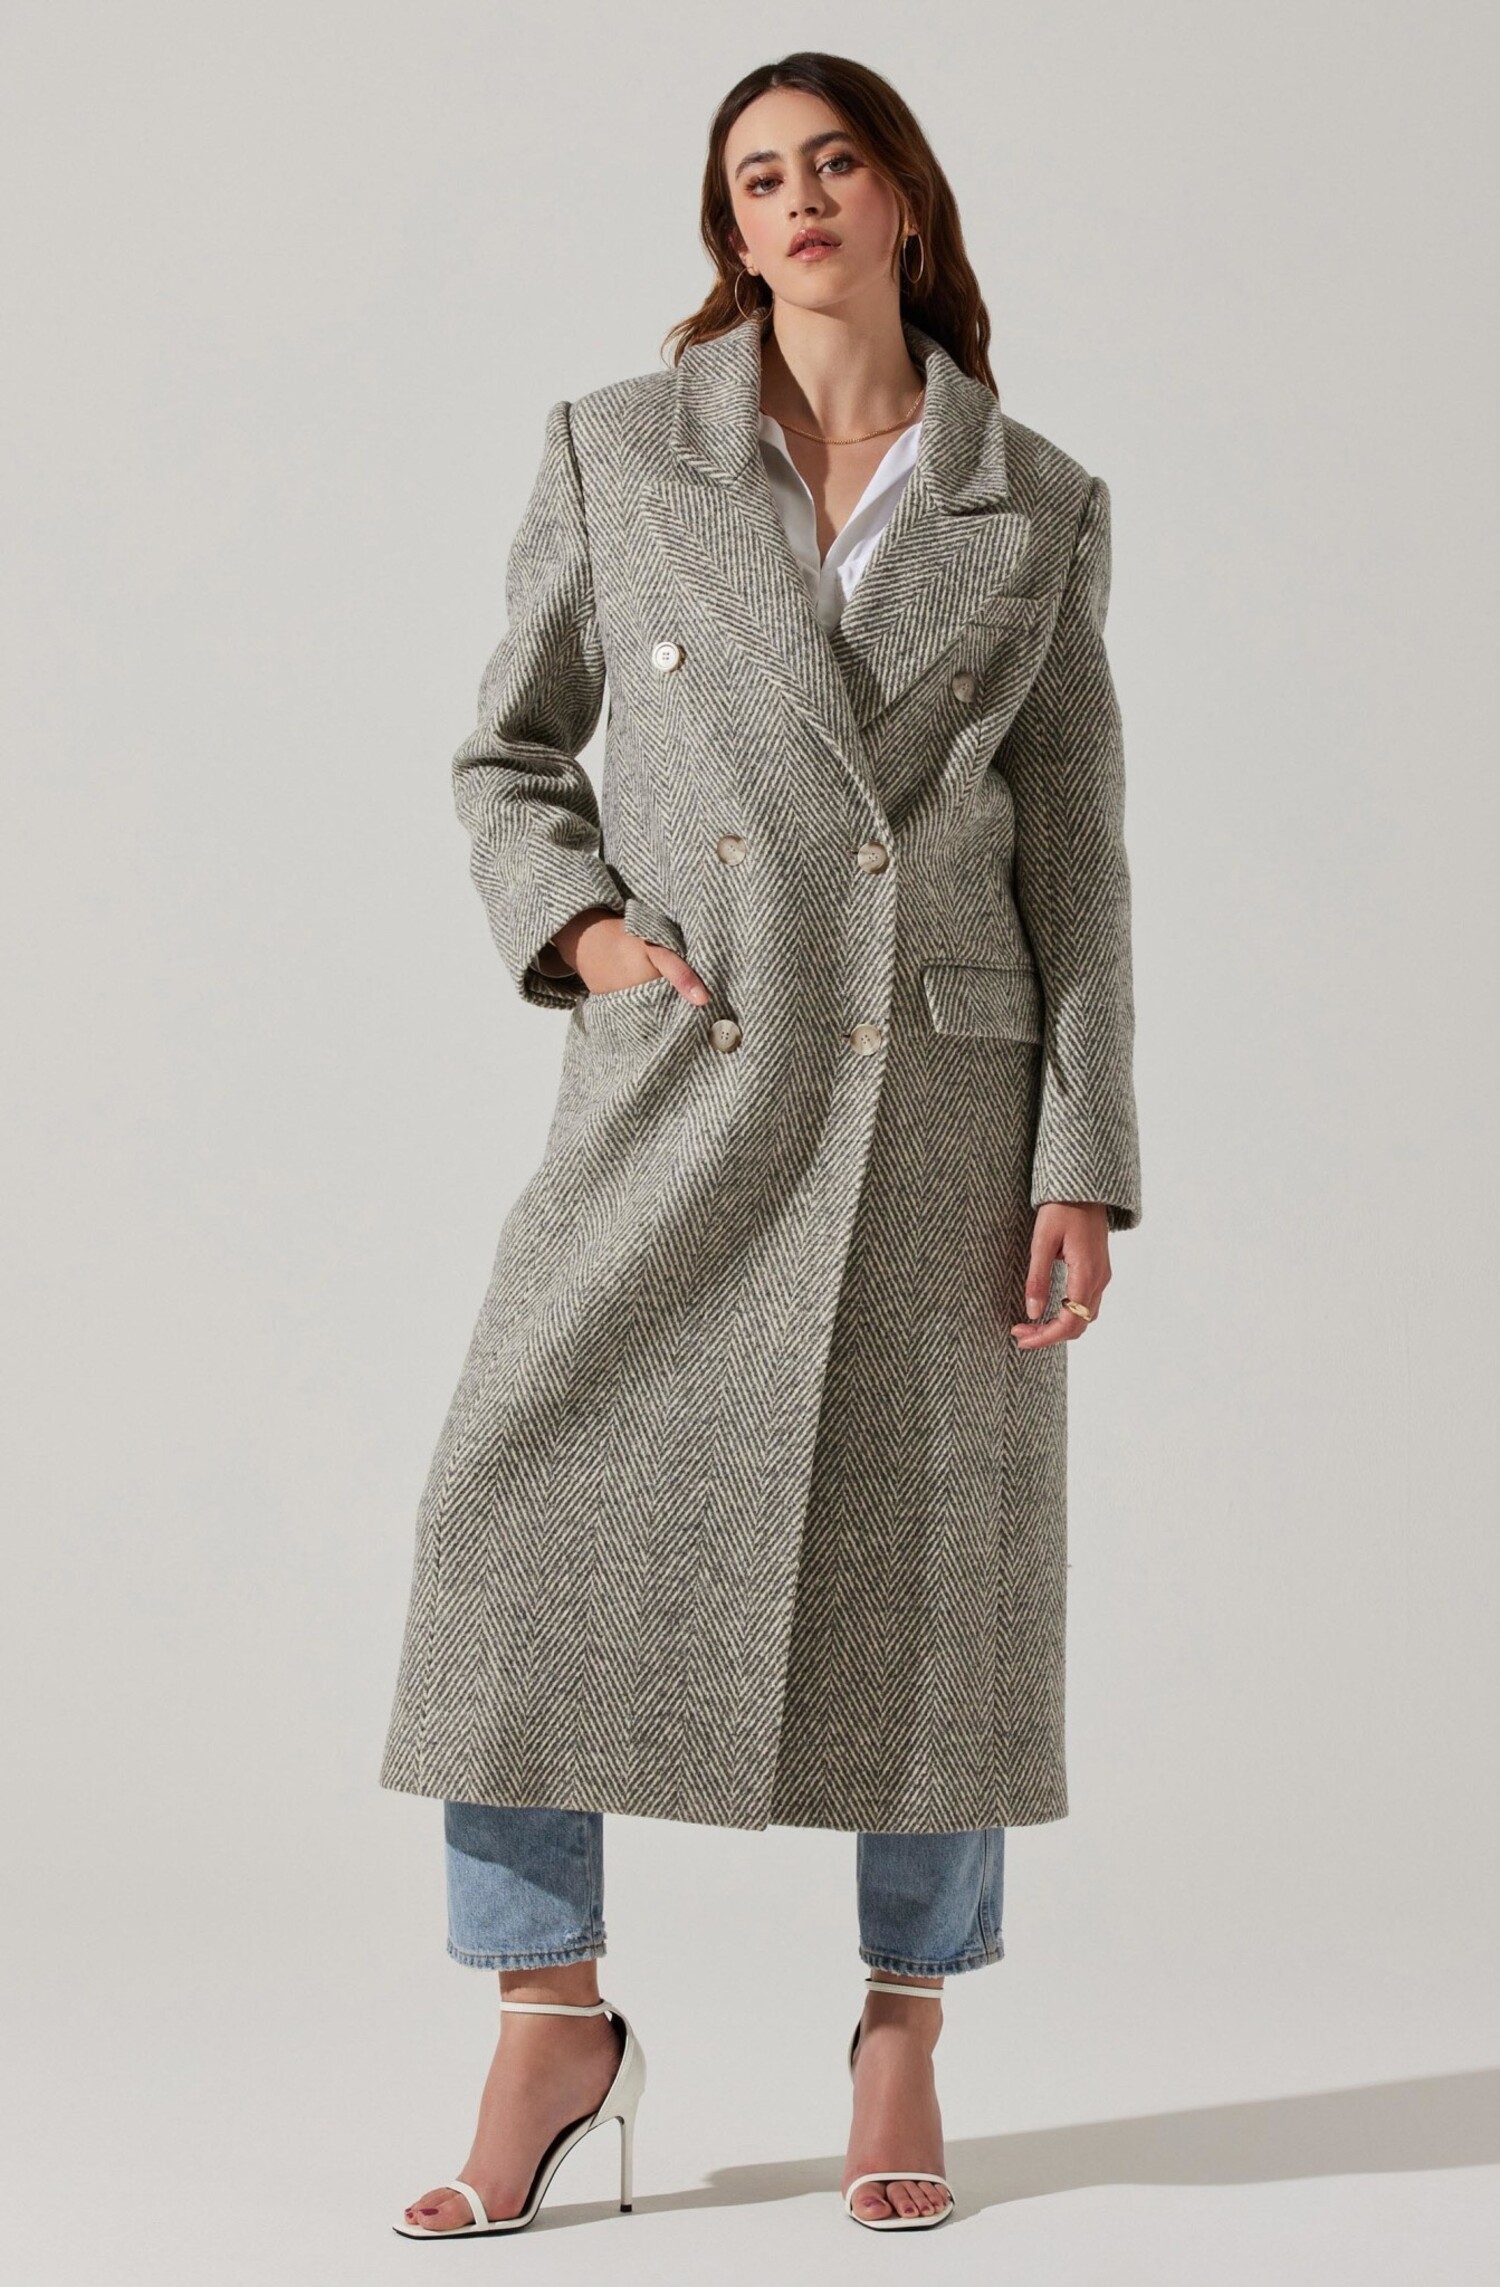 By Anthropologie Oversized Collar Coat